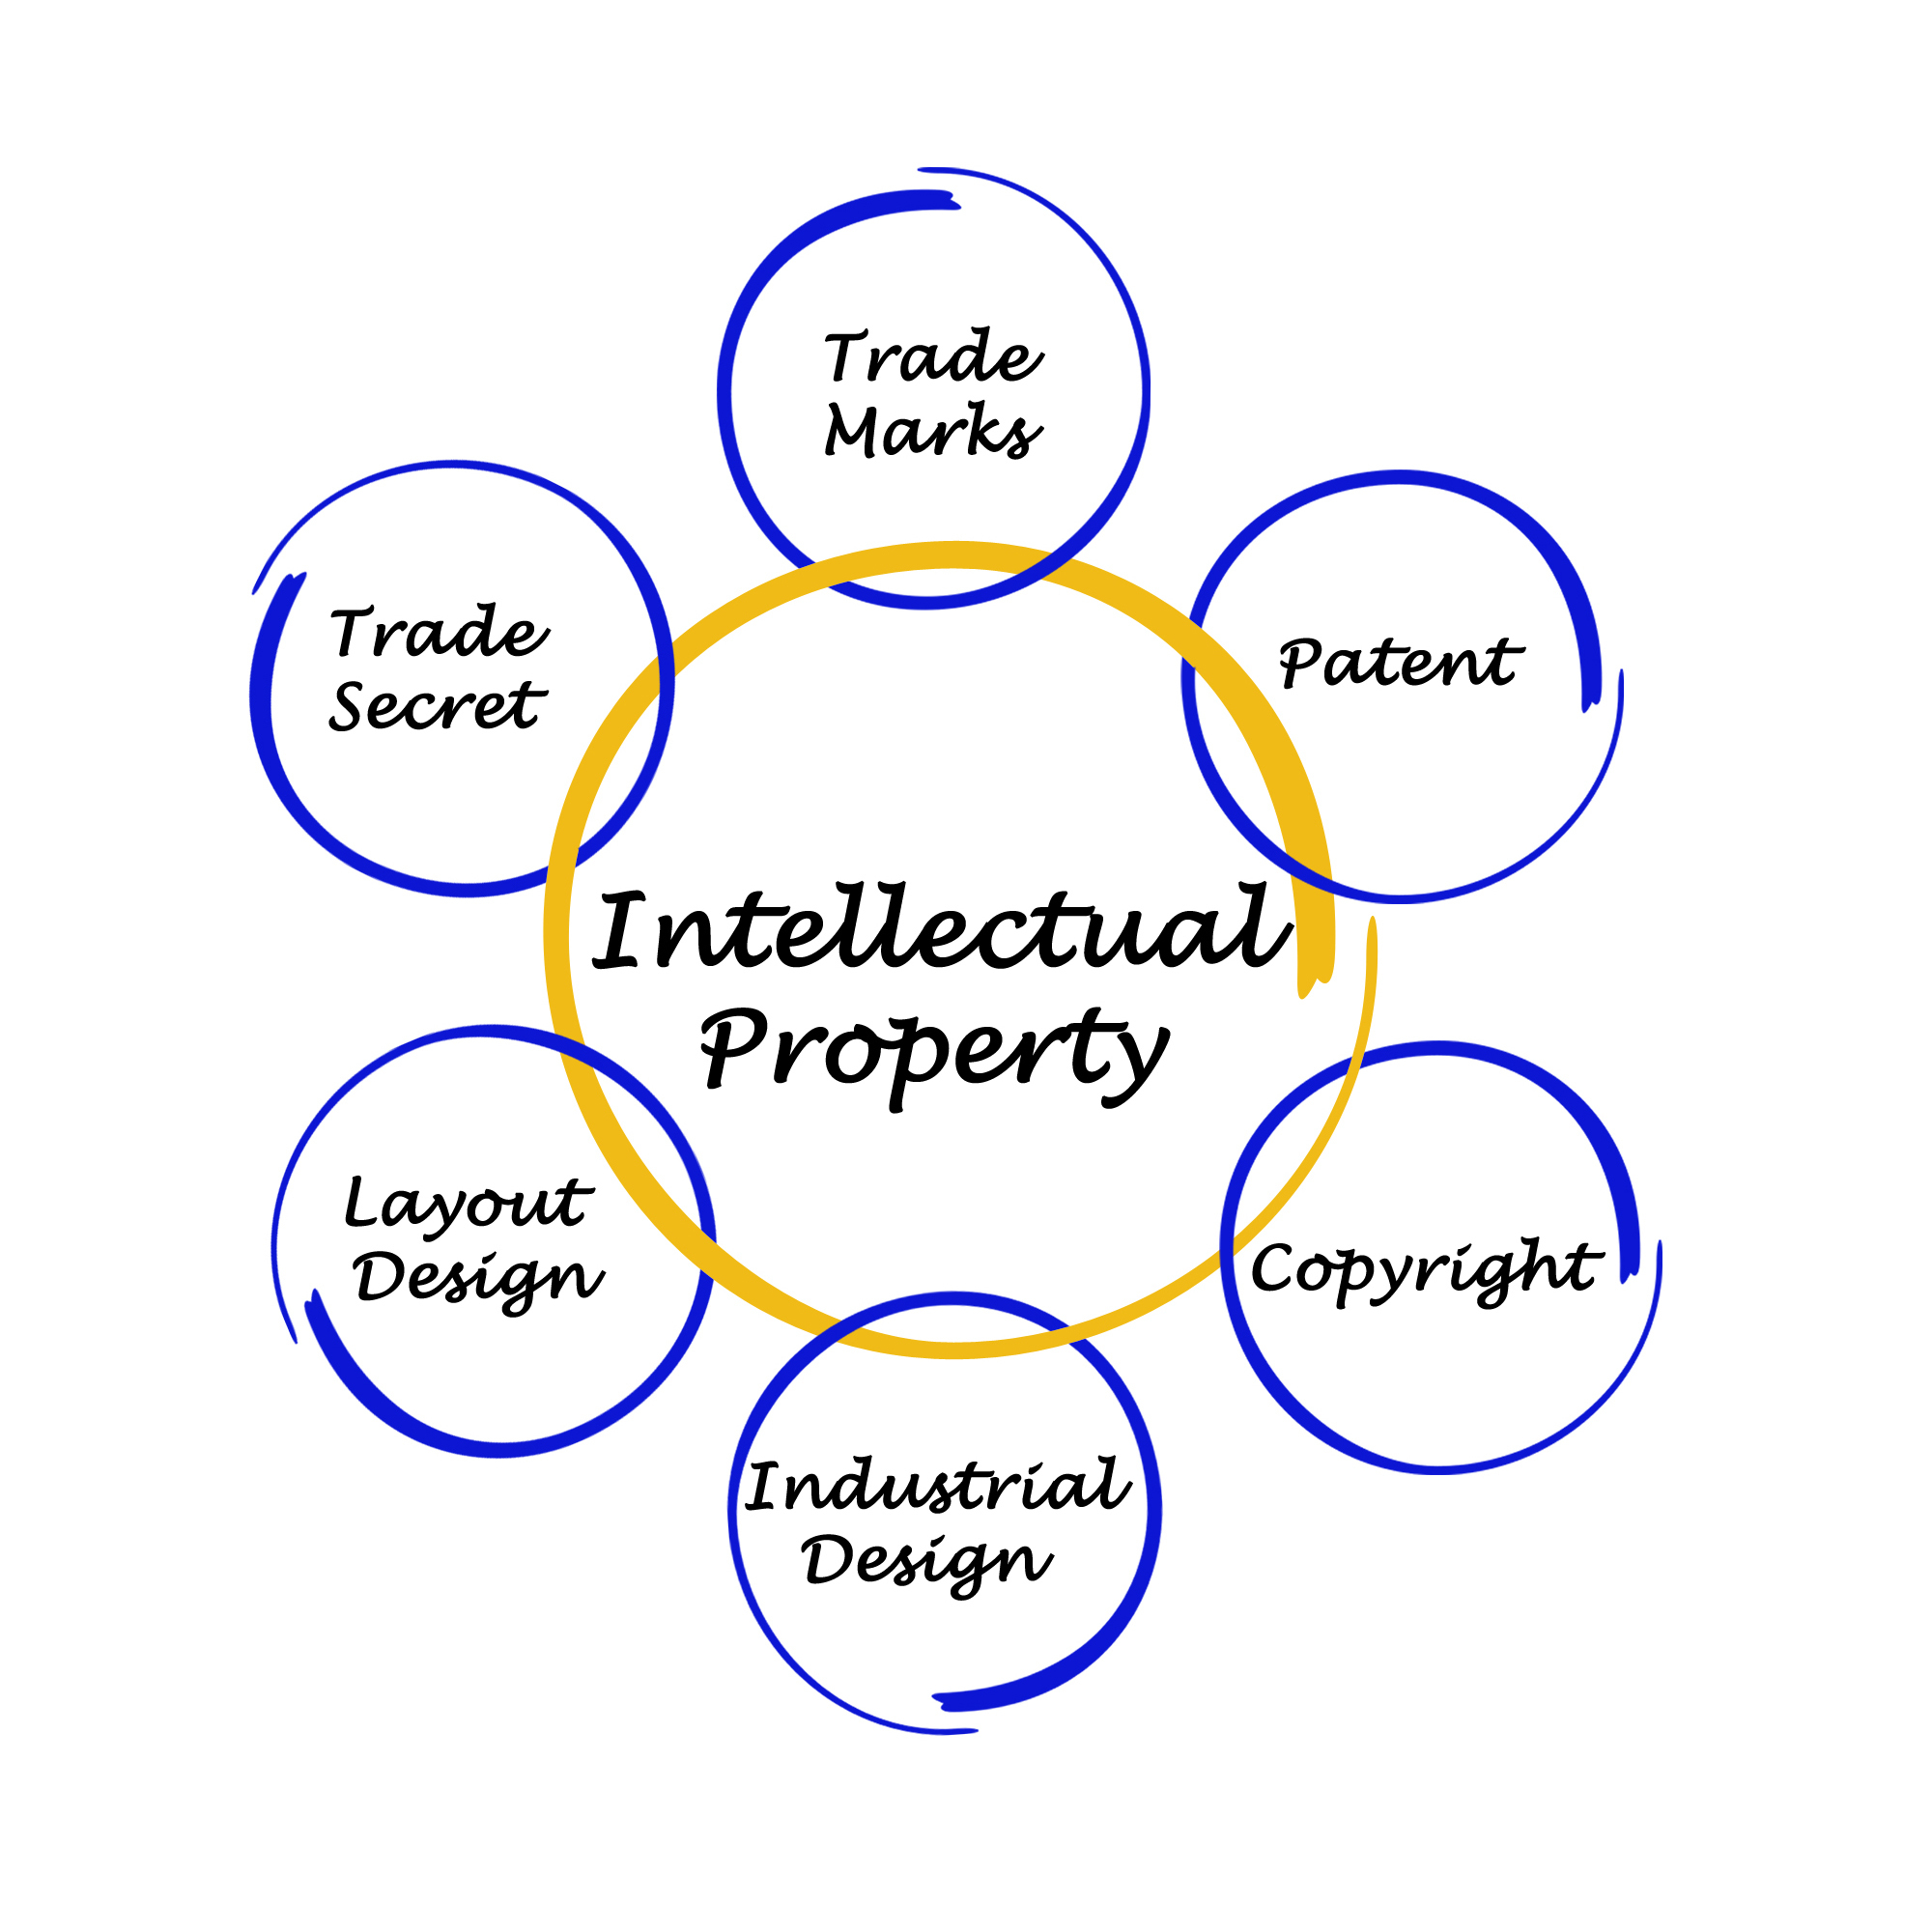 Venn diagram illustration of what is considered intellectual property.